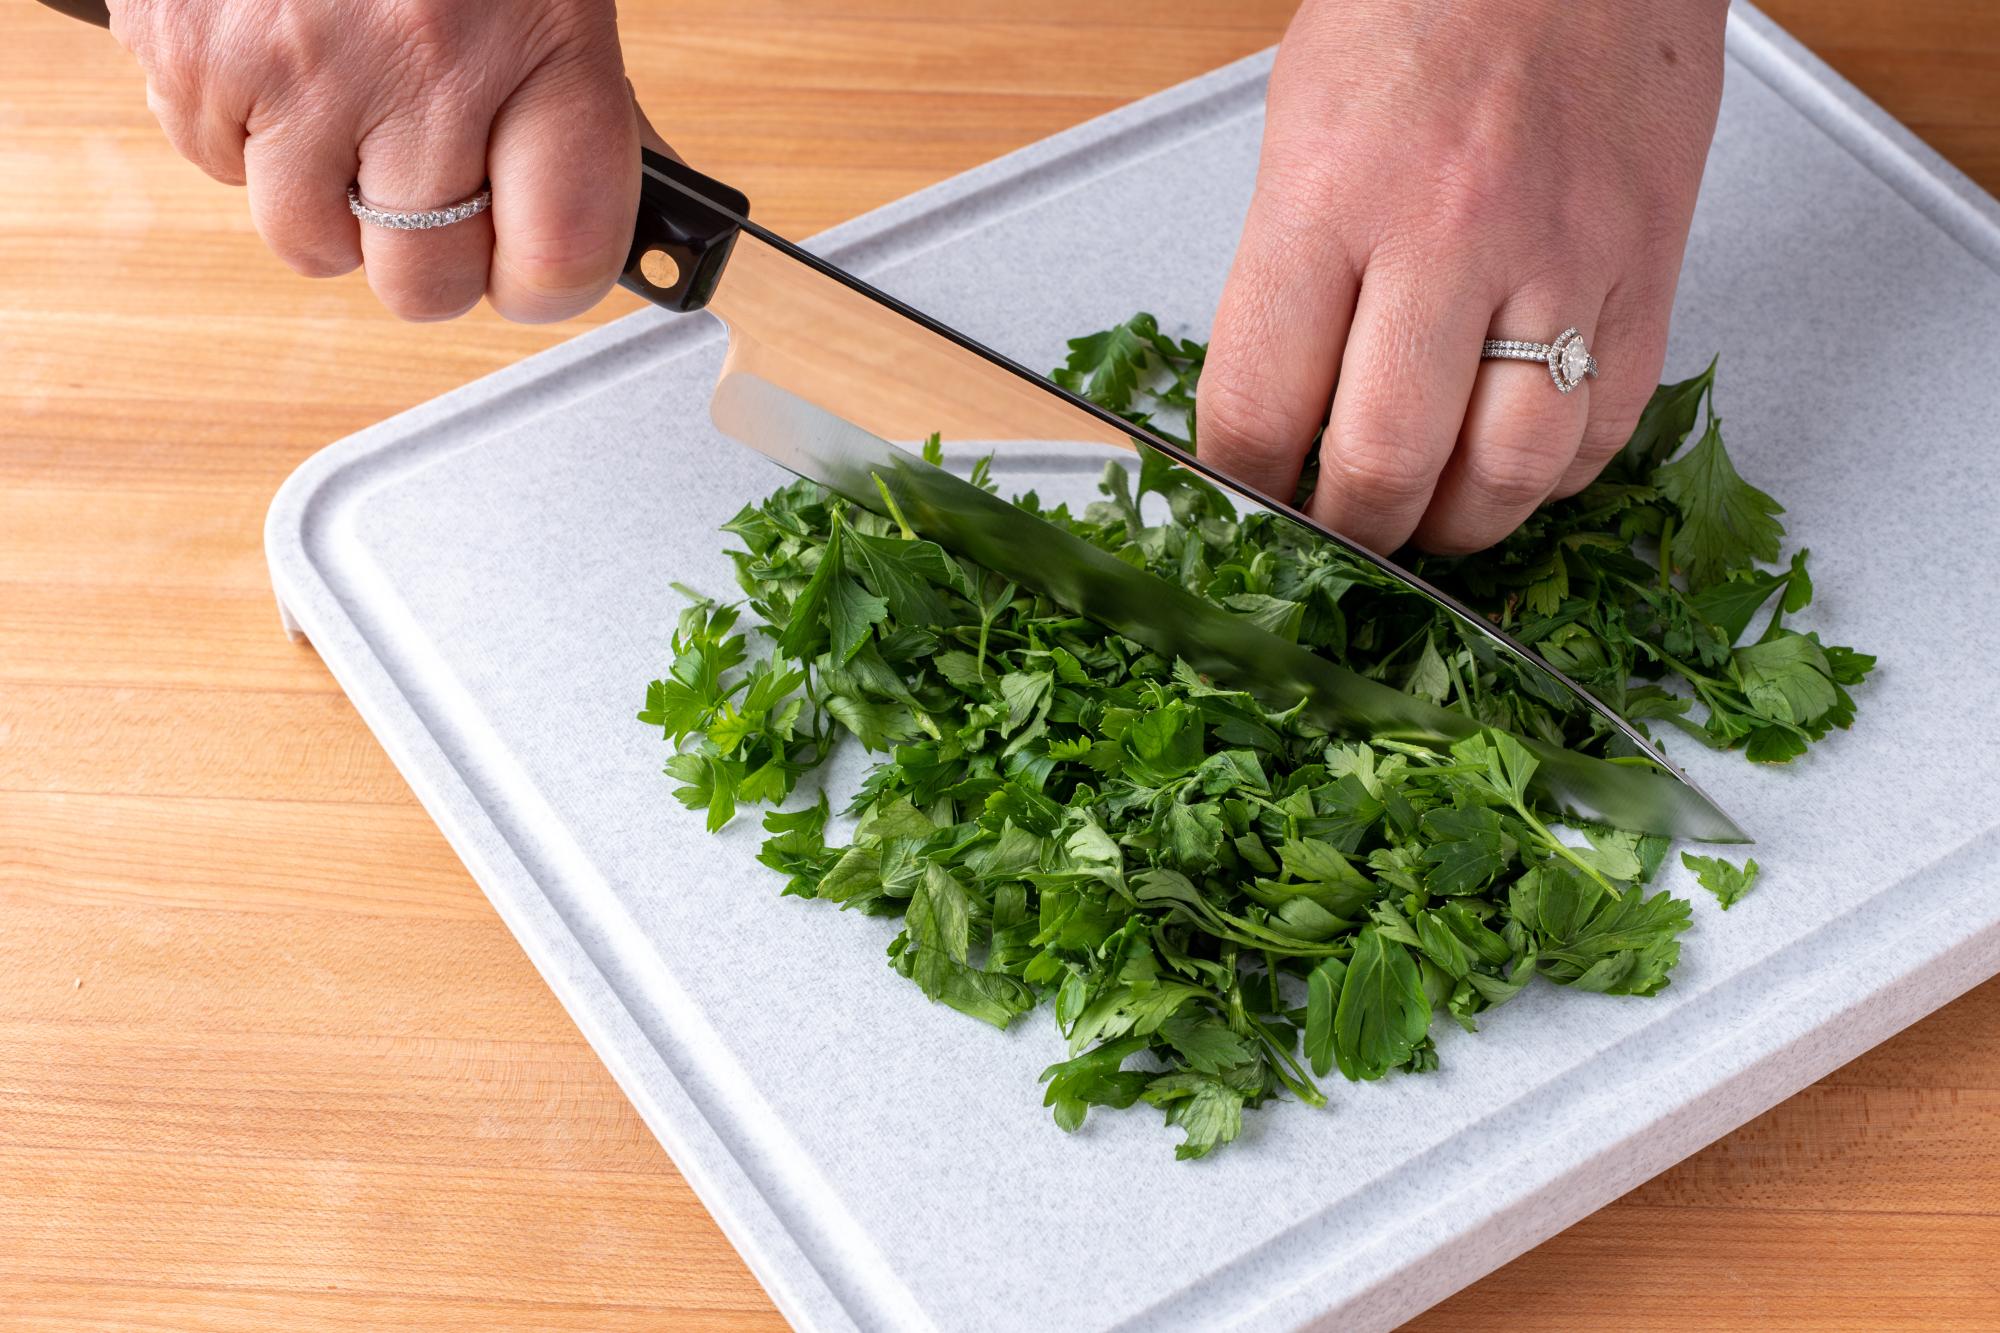 The Petite Chef is being used to rough chop the parsley.